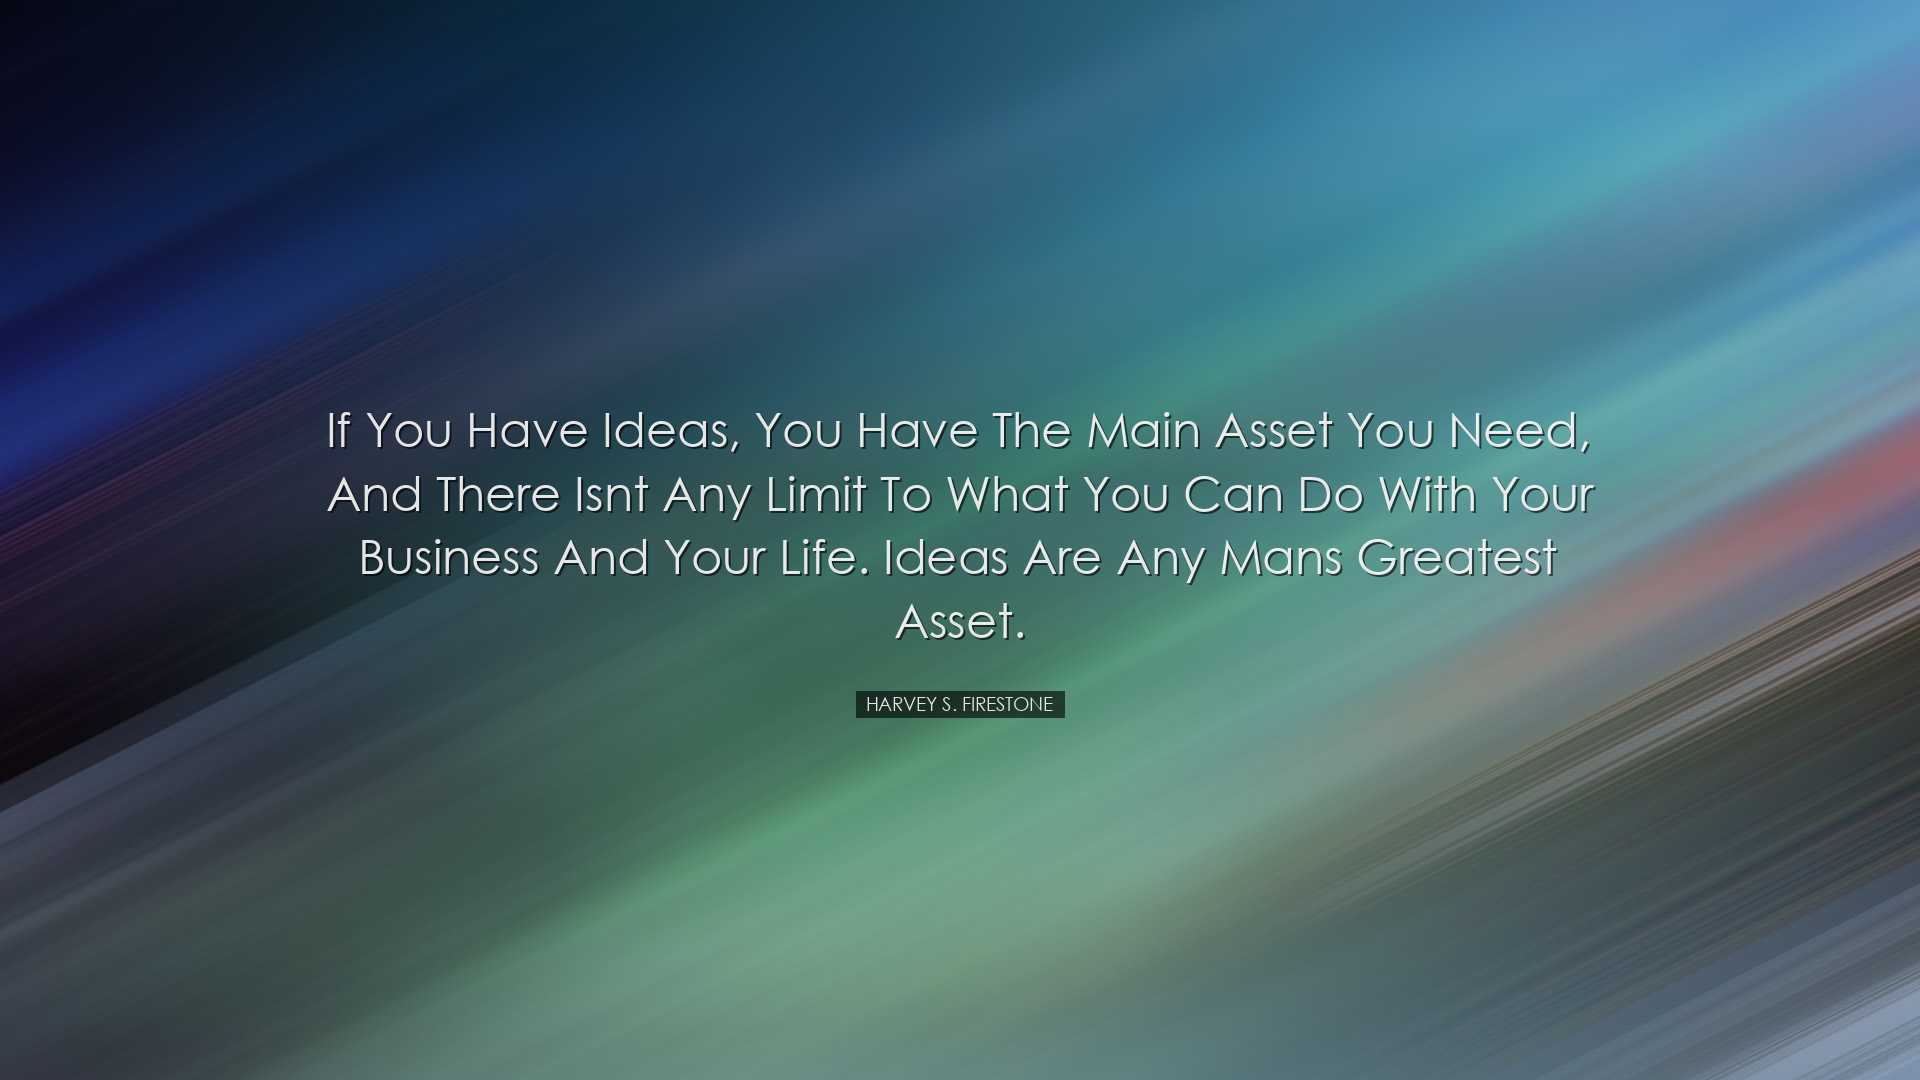 If you have ideas, you have the main asset you need, and there isn